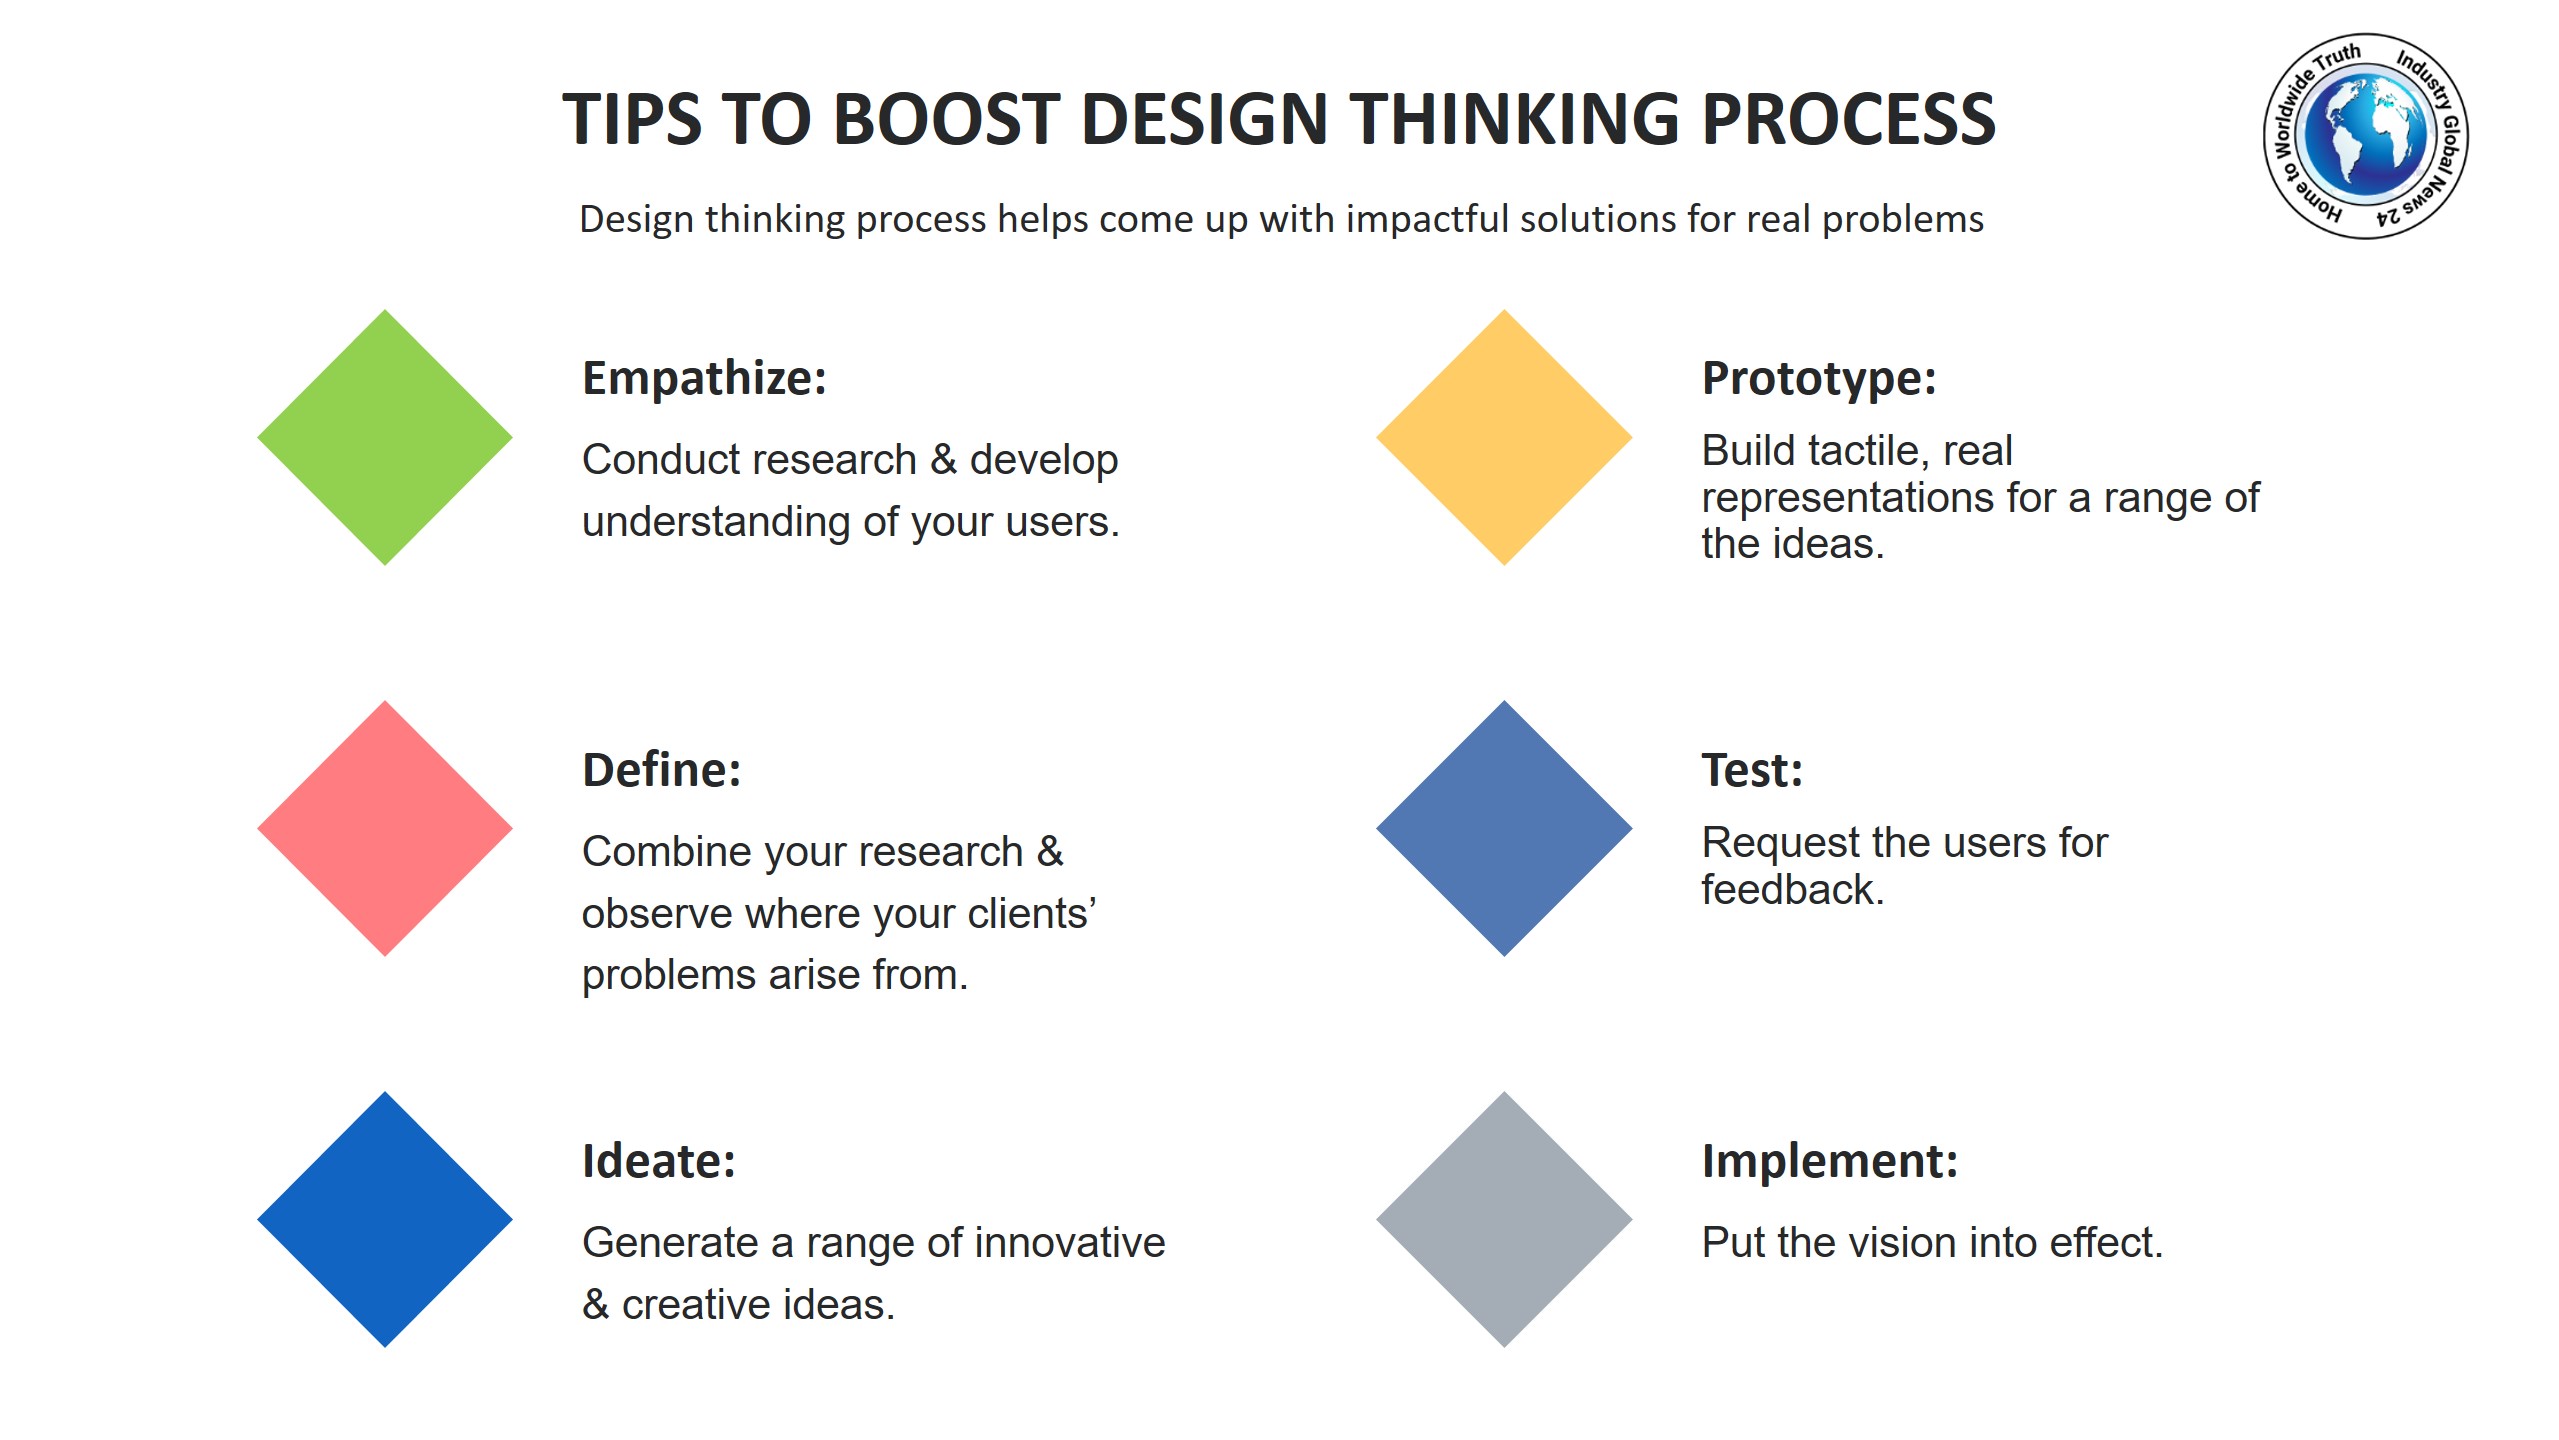 Tips to boost design thinking process